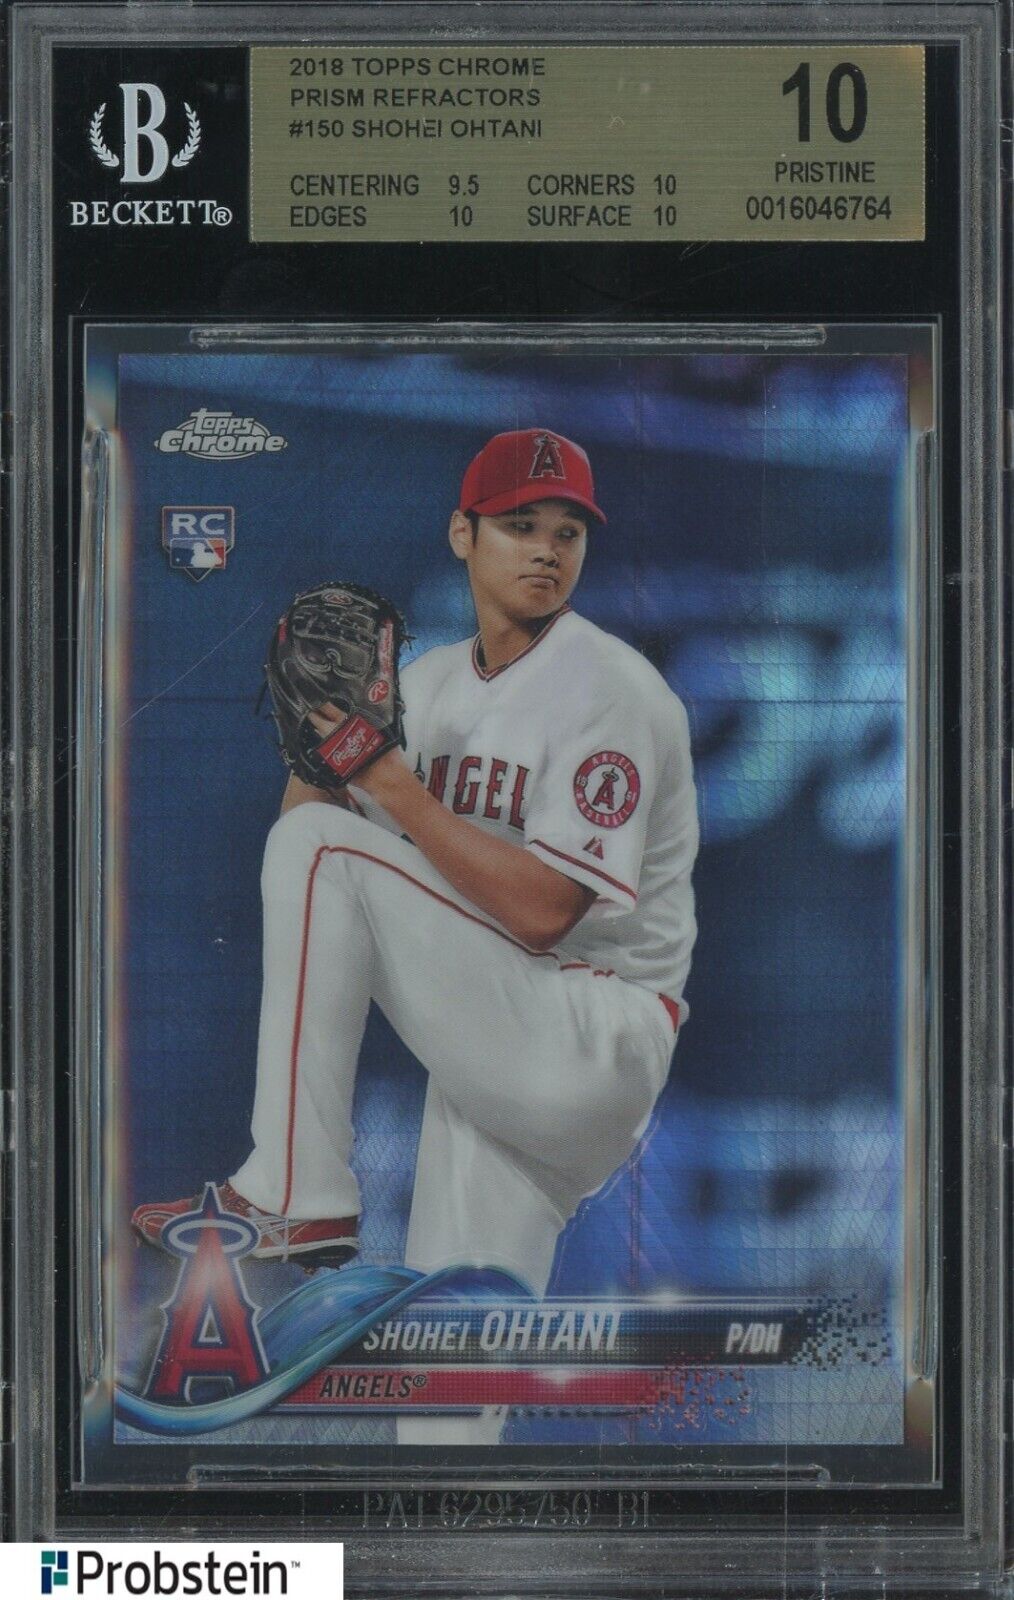 2018 Topps Chrome Prism Refractor Shohei Ohtani Angels RC Rookie BGS 10 PRISTINE